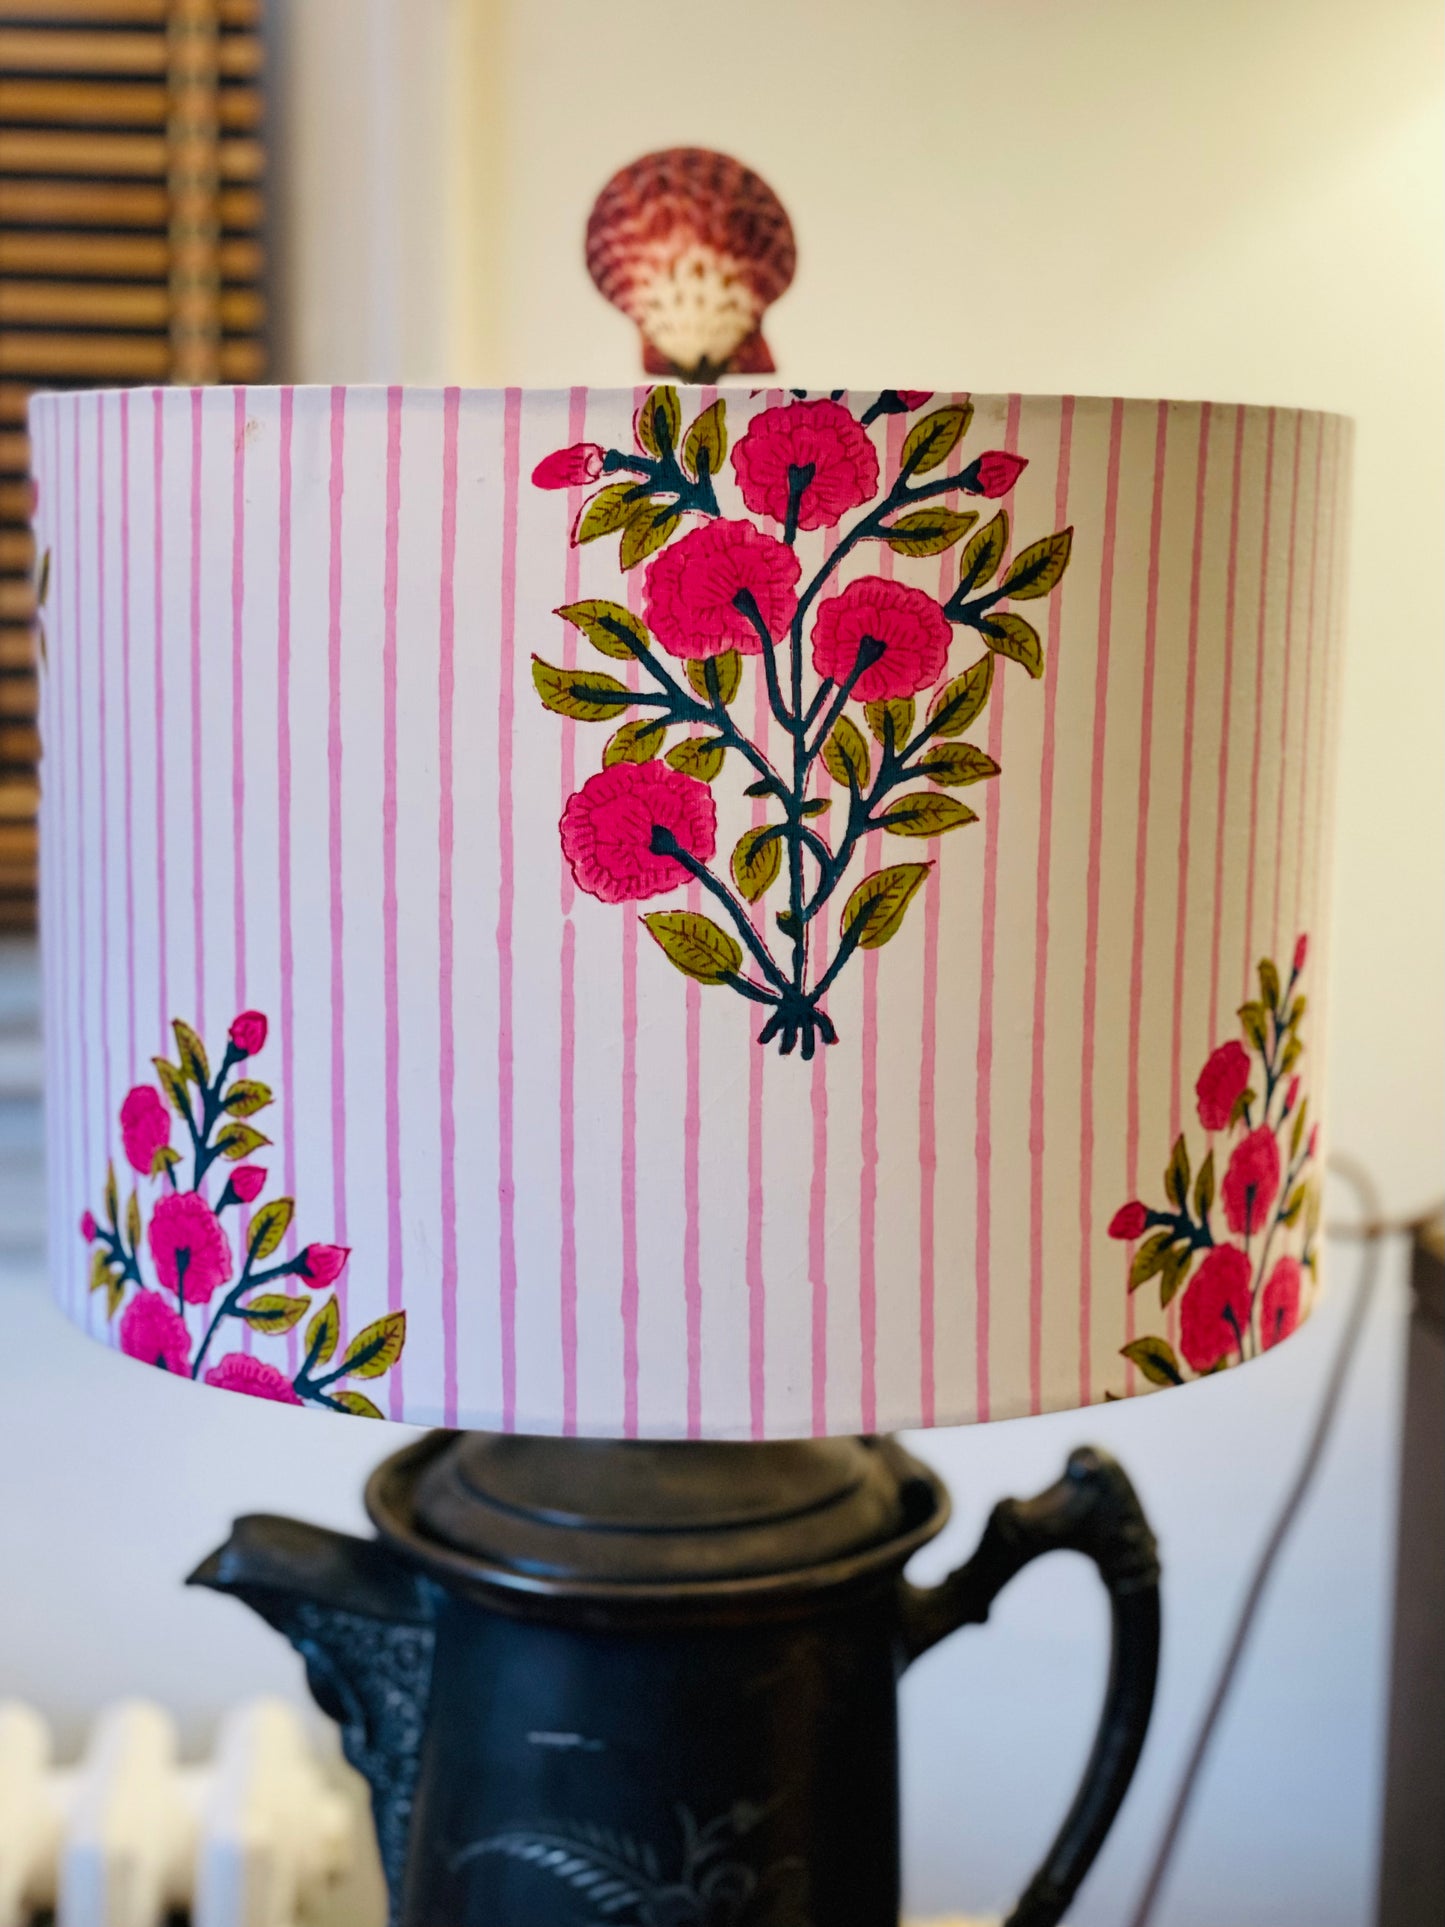 12 Inch Drum Shade. Indian Block print from Jaipur. Raspberry Rose, Green, Deep Teal Floral and Faded Pink Stripe.